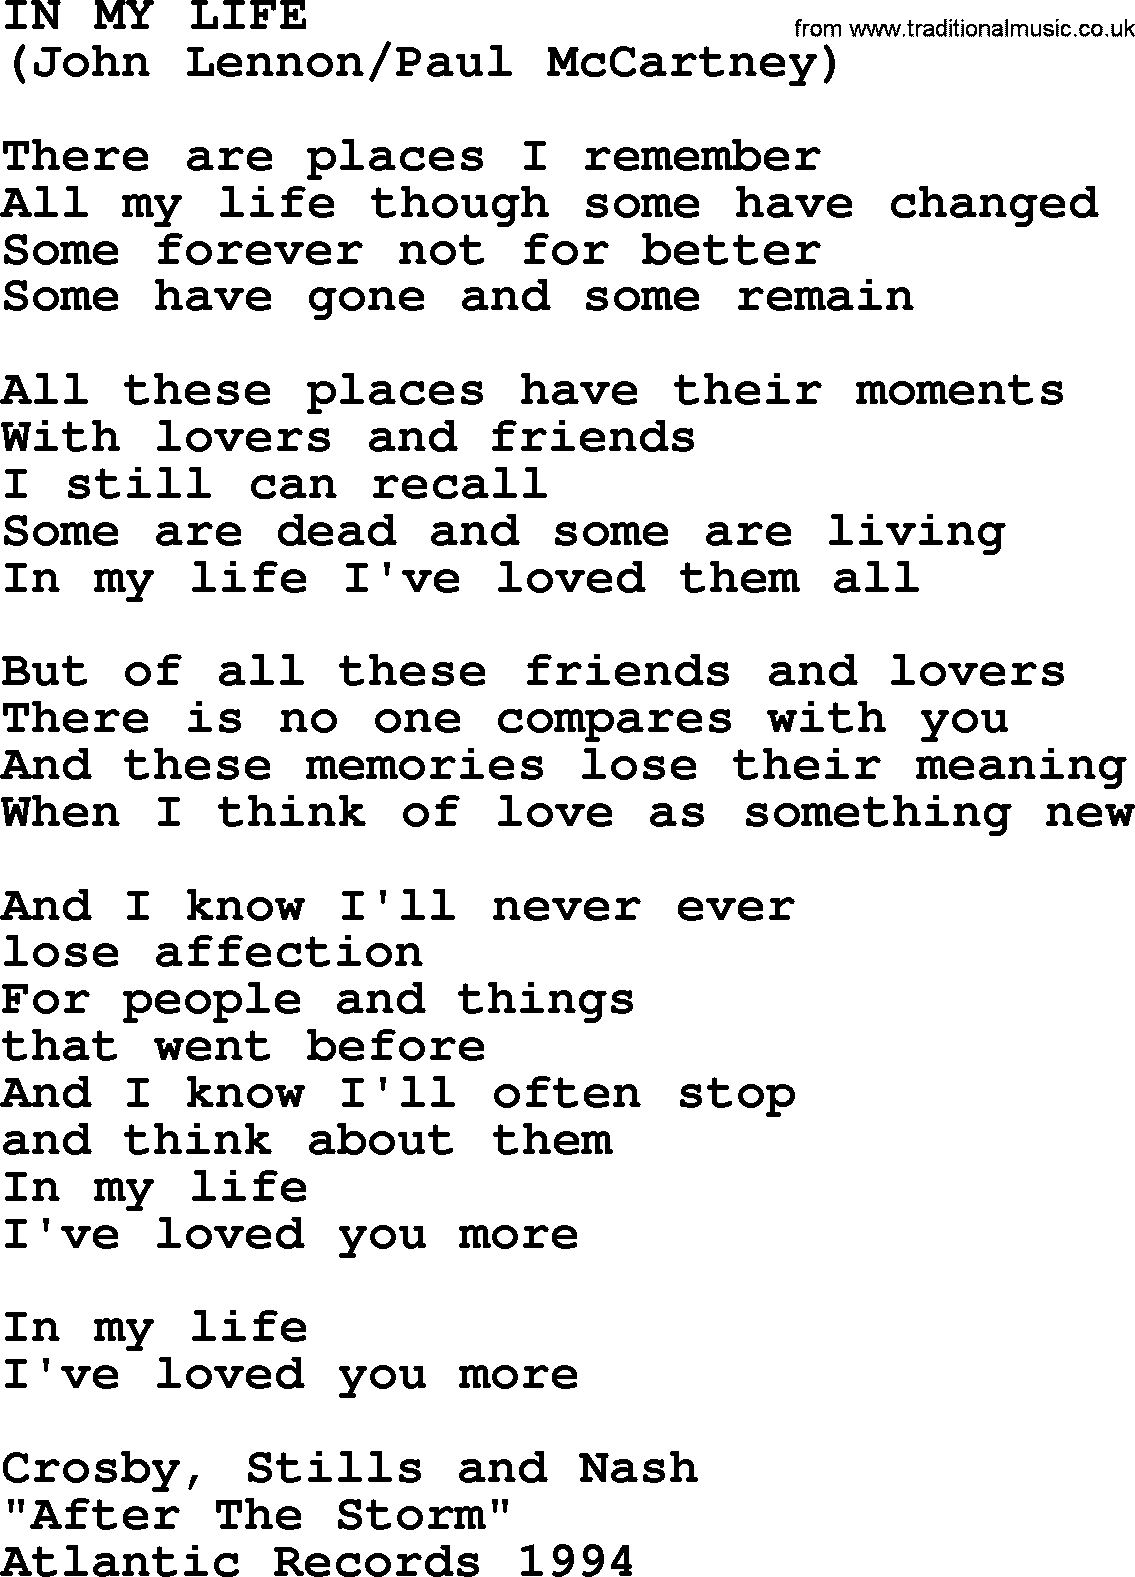 The Byrds song In My Life, lyrics